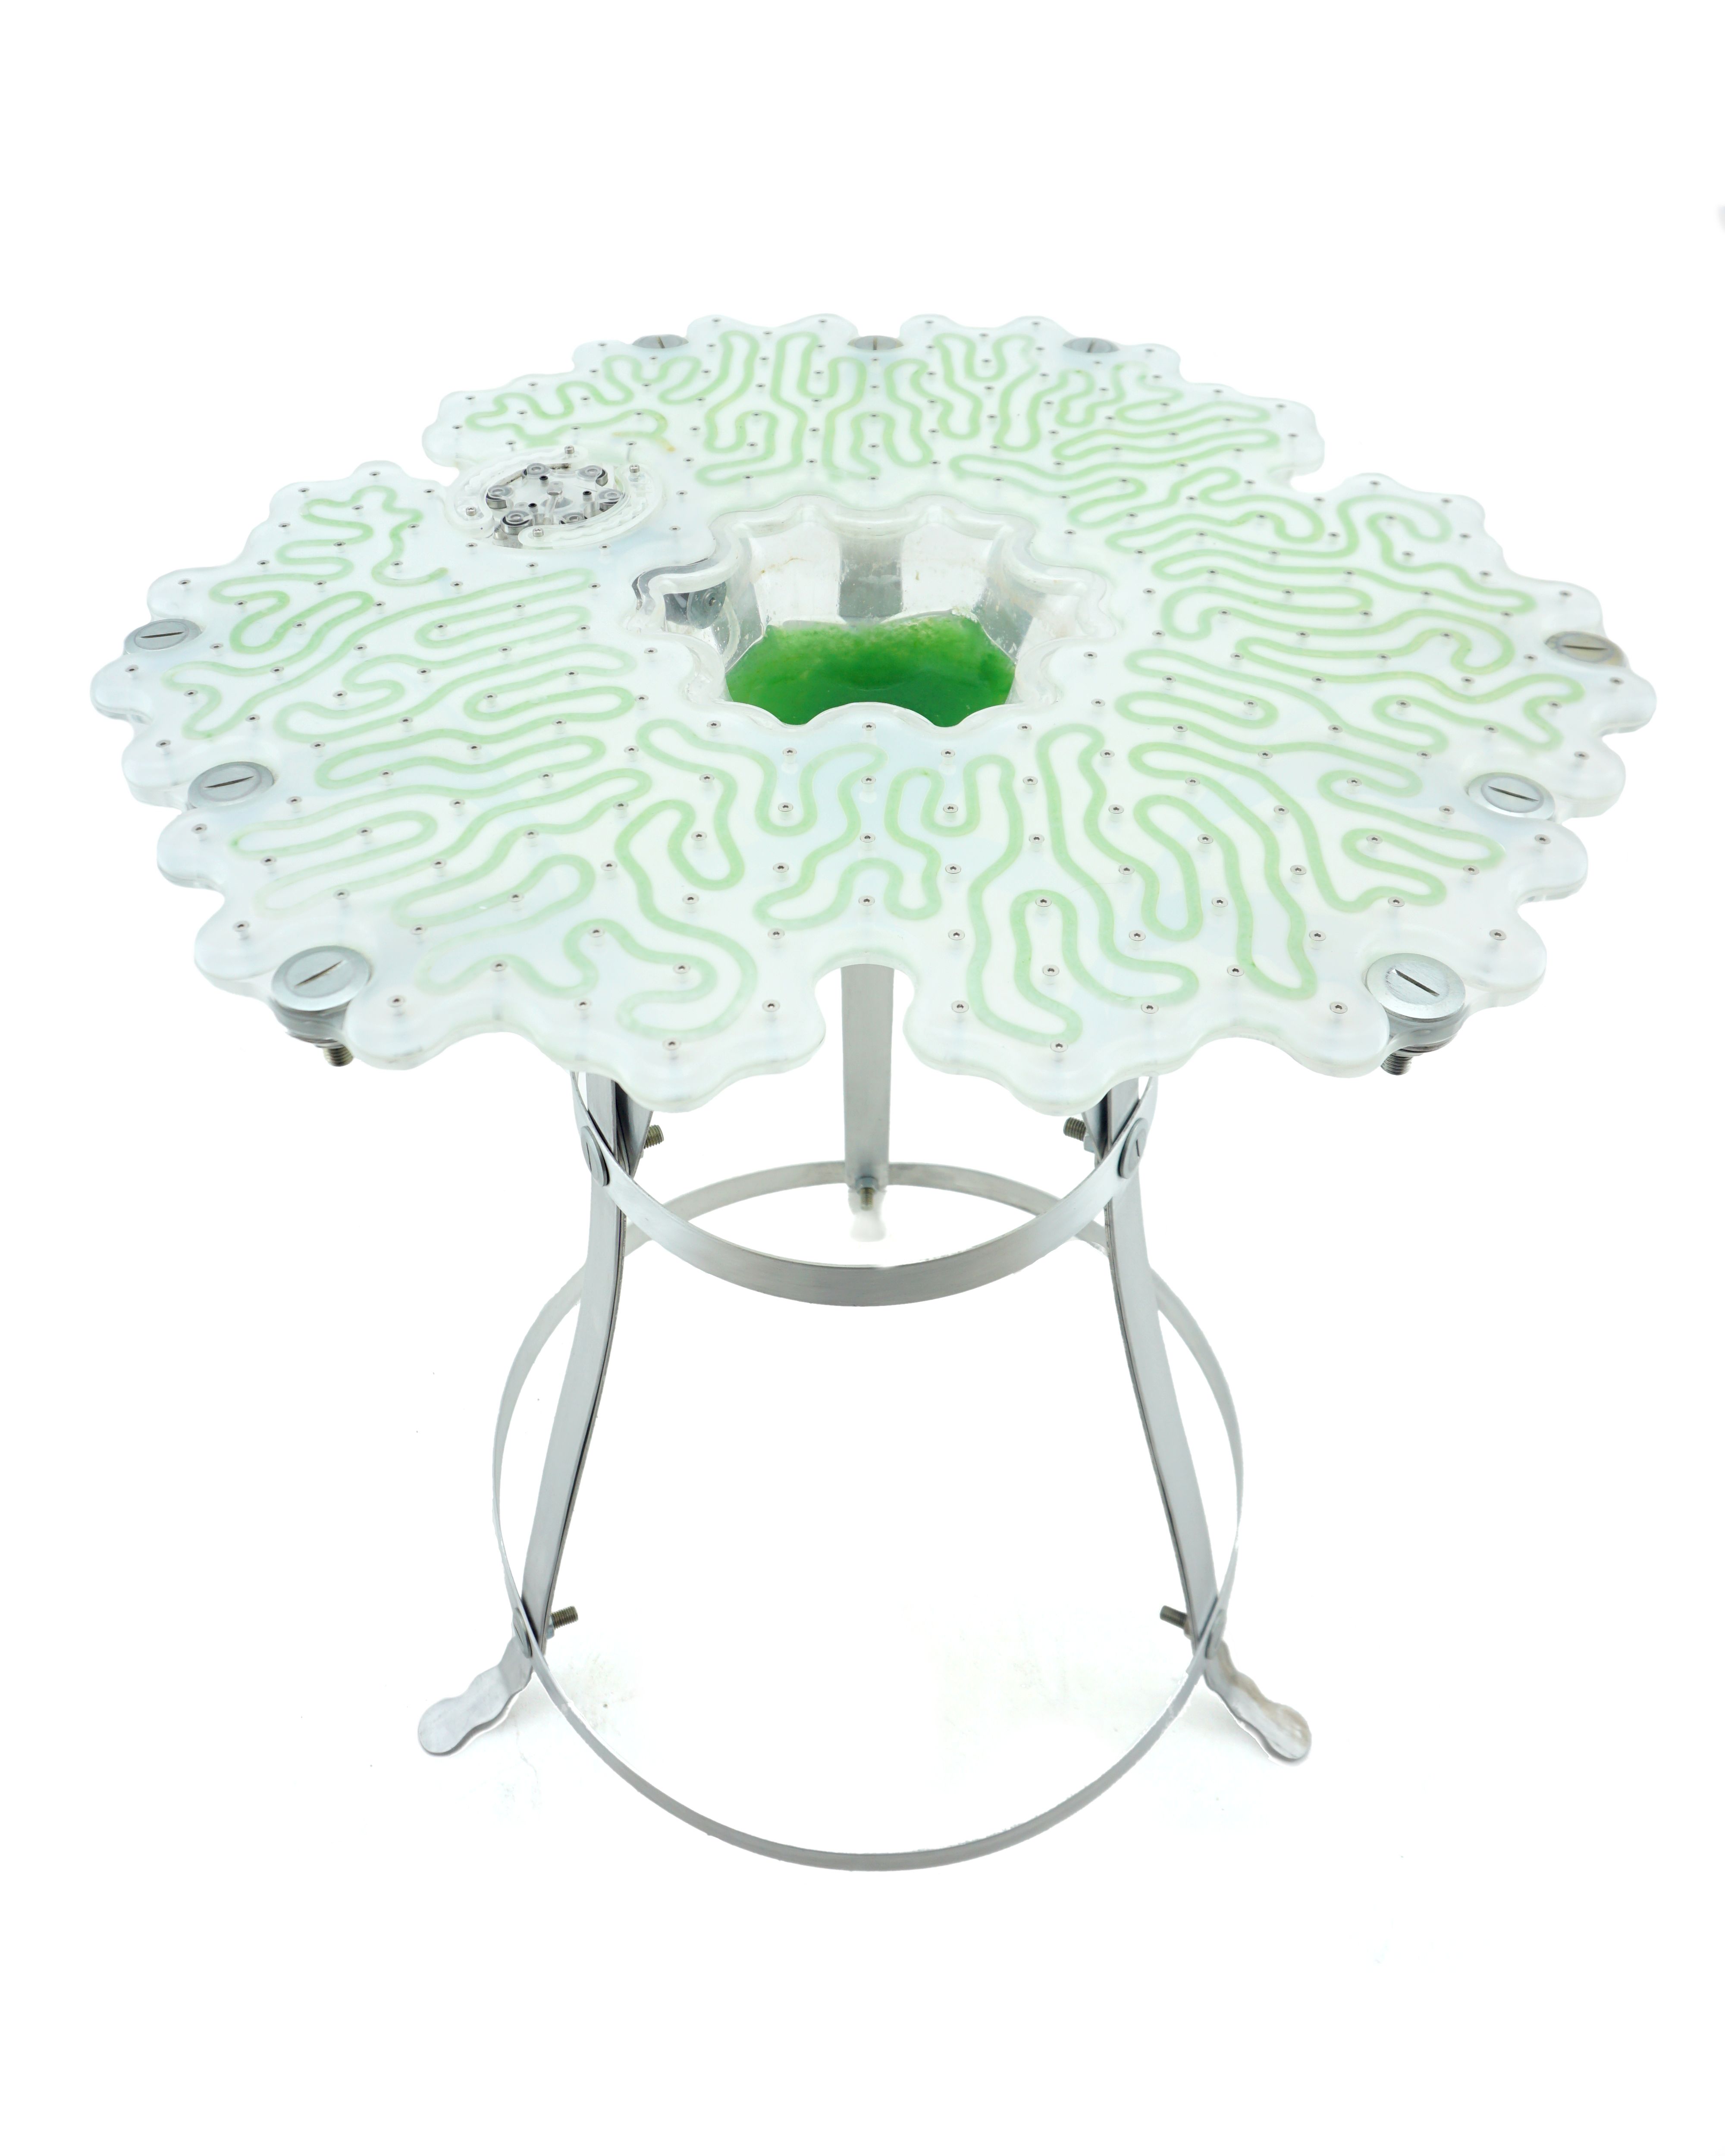 A table with green circuit board made of algae and metal legs